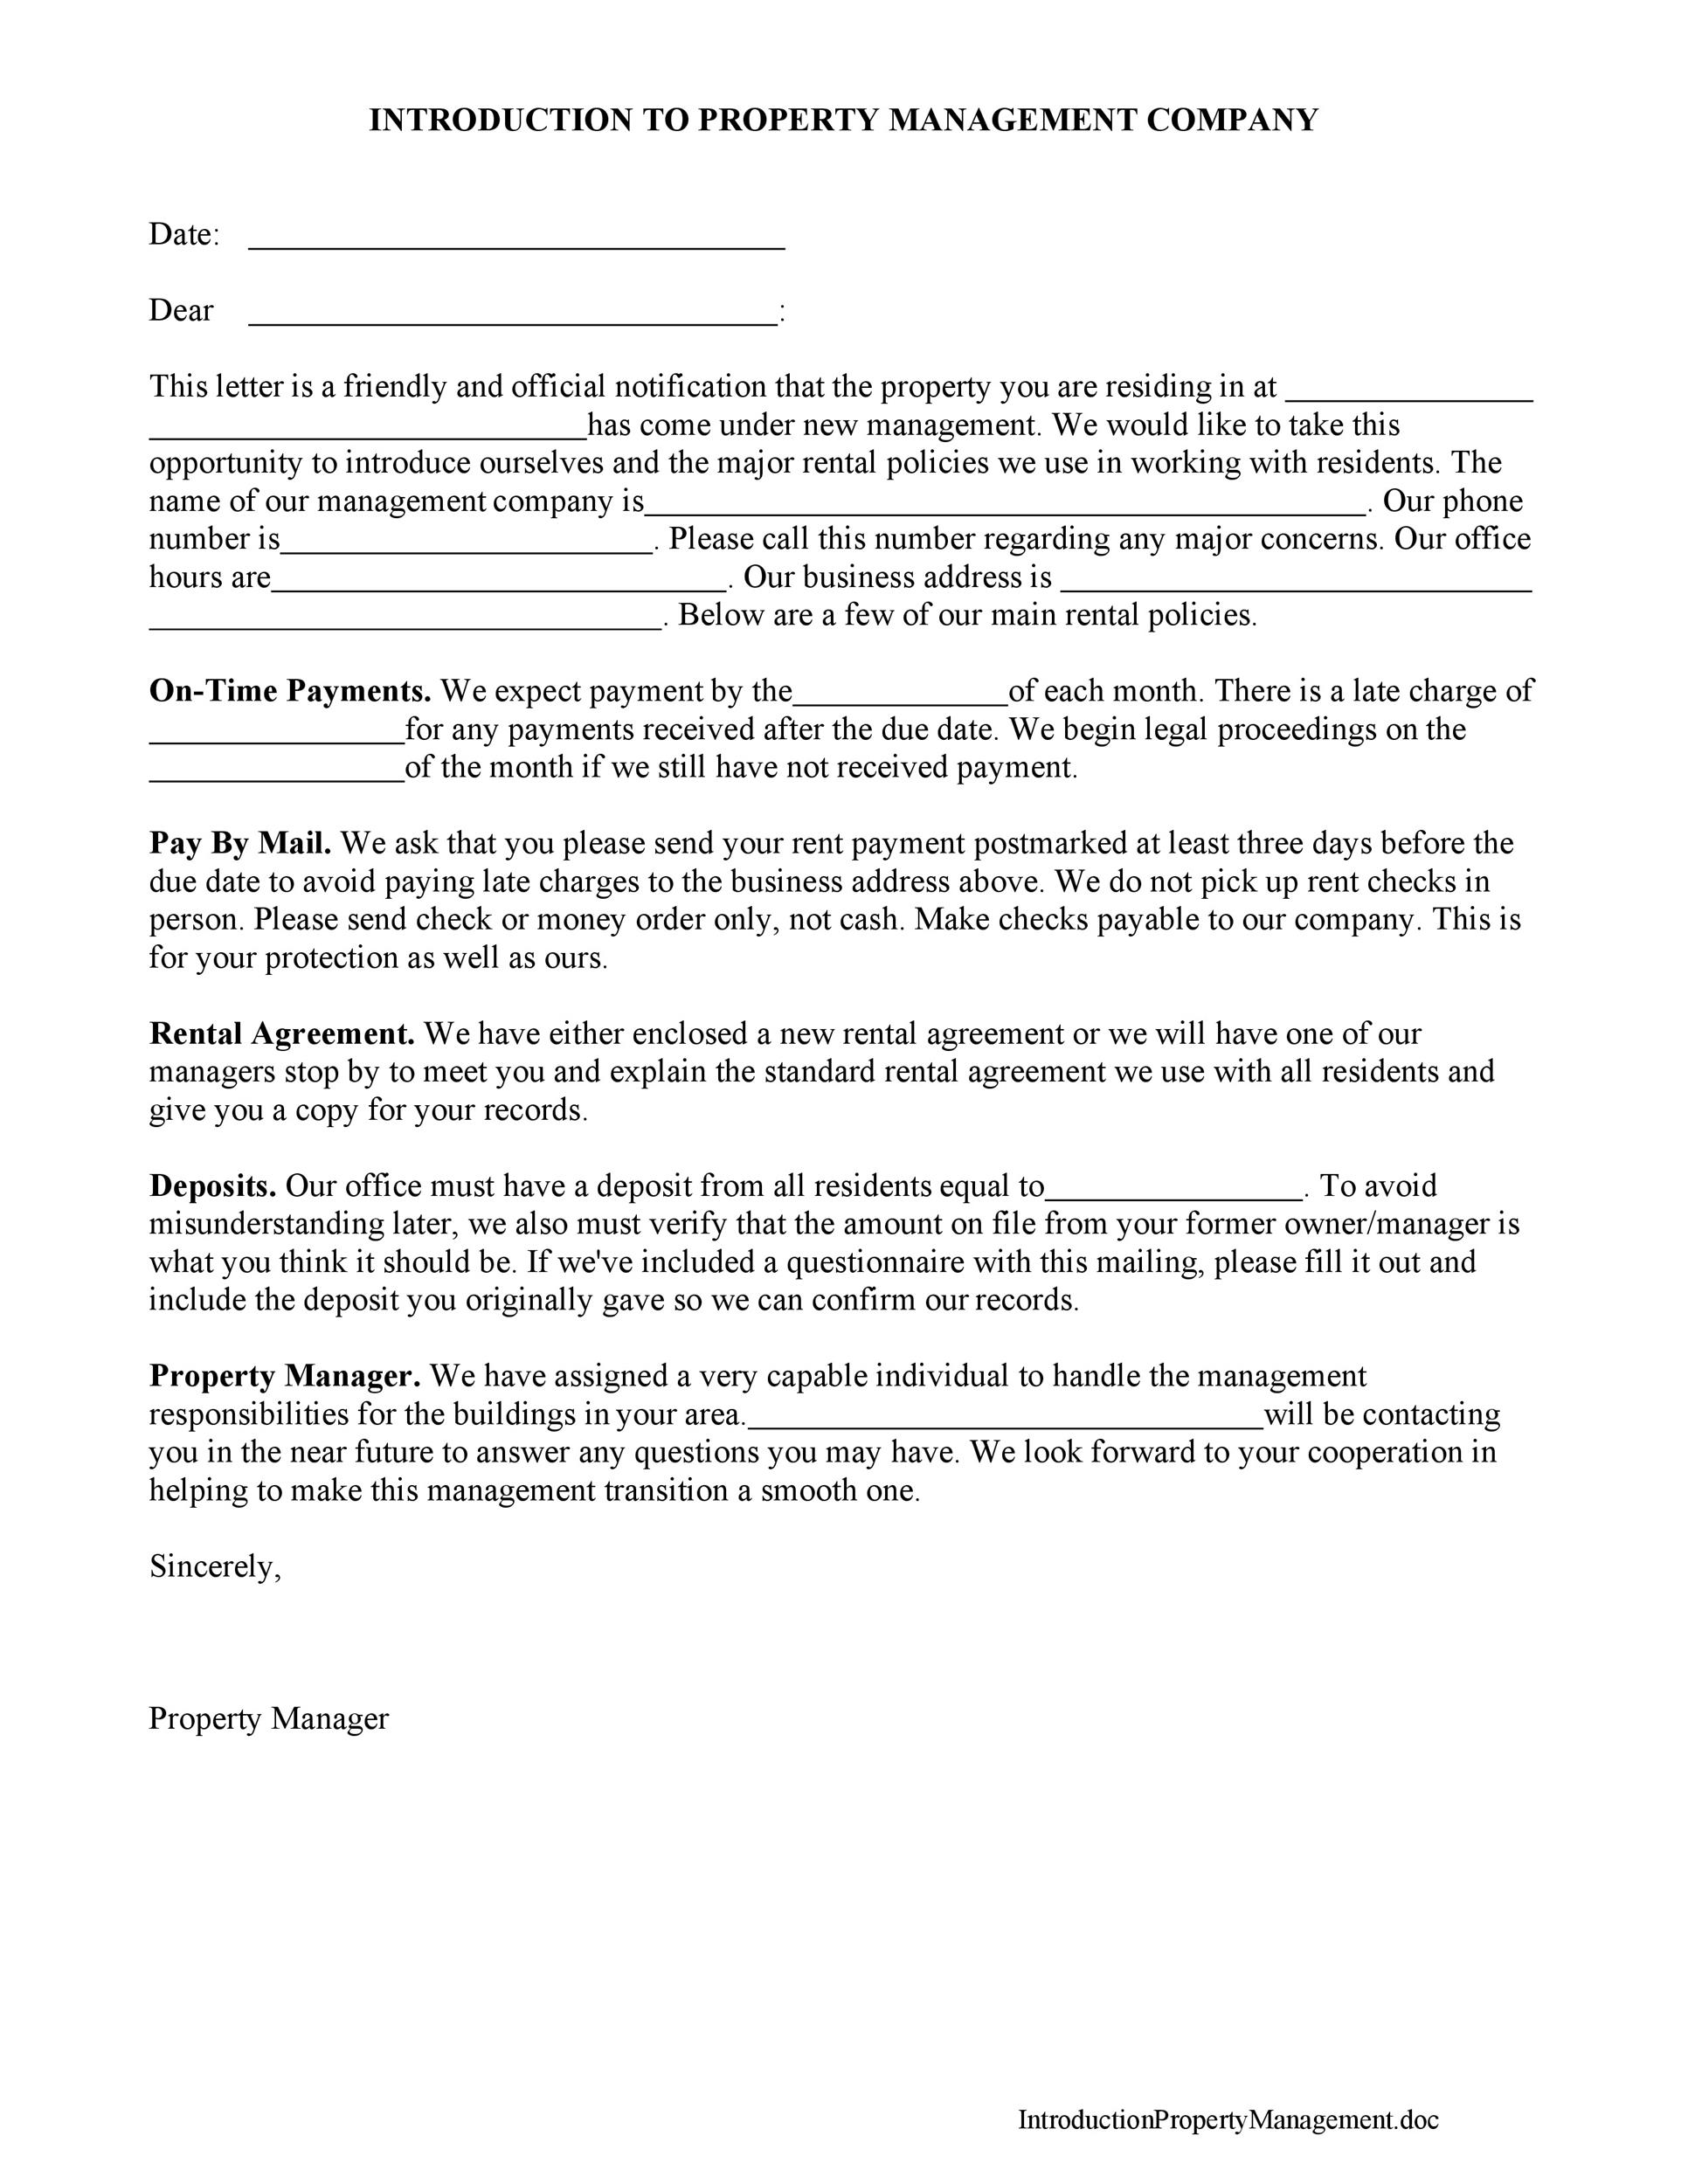 Free business introduction letter 16